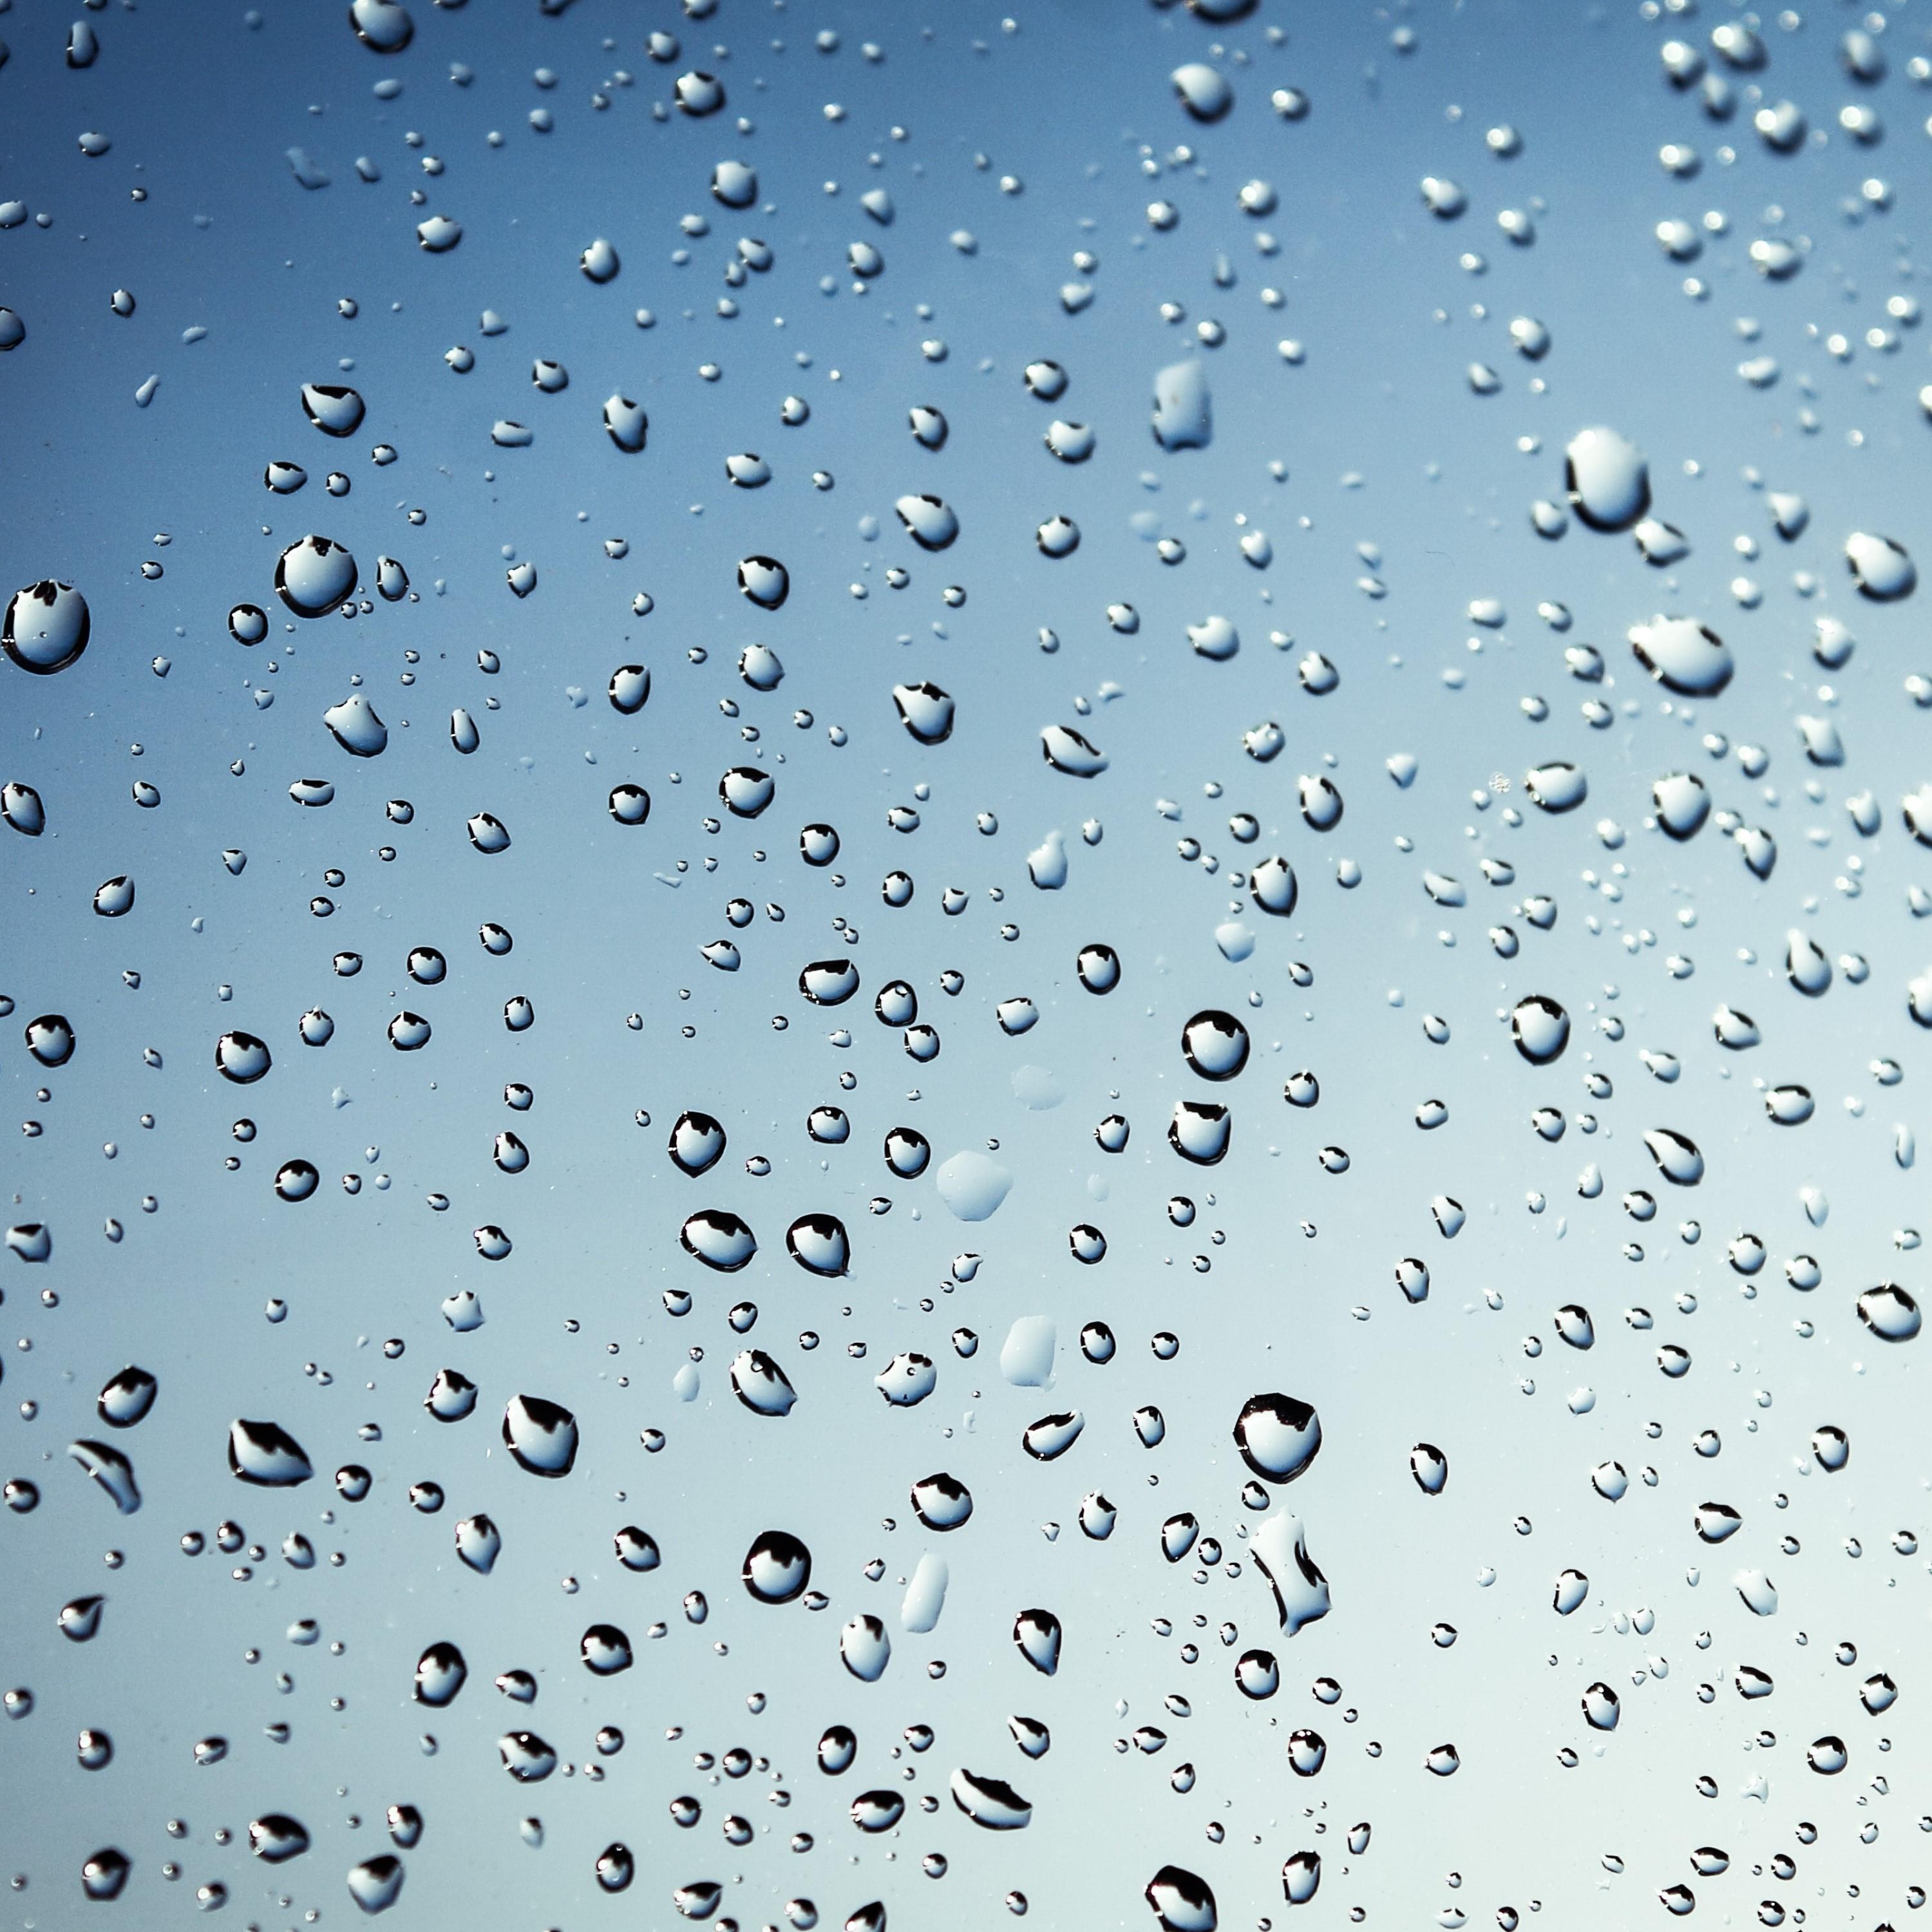 August 2019: Light Rain for Summer Afternoon Chill